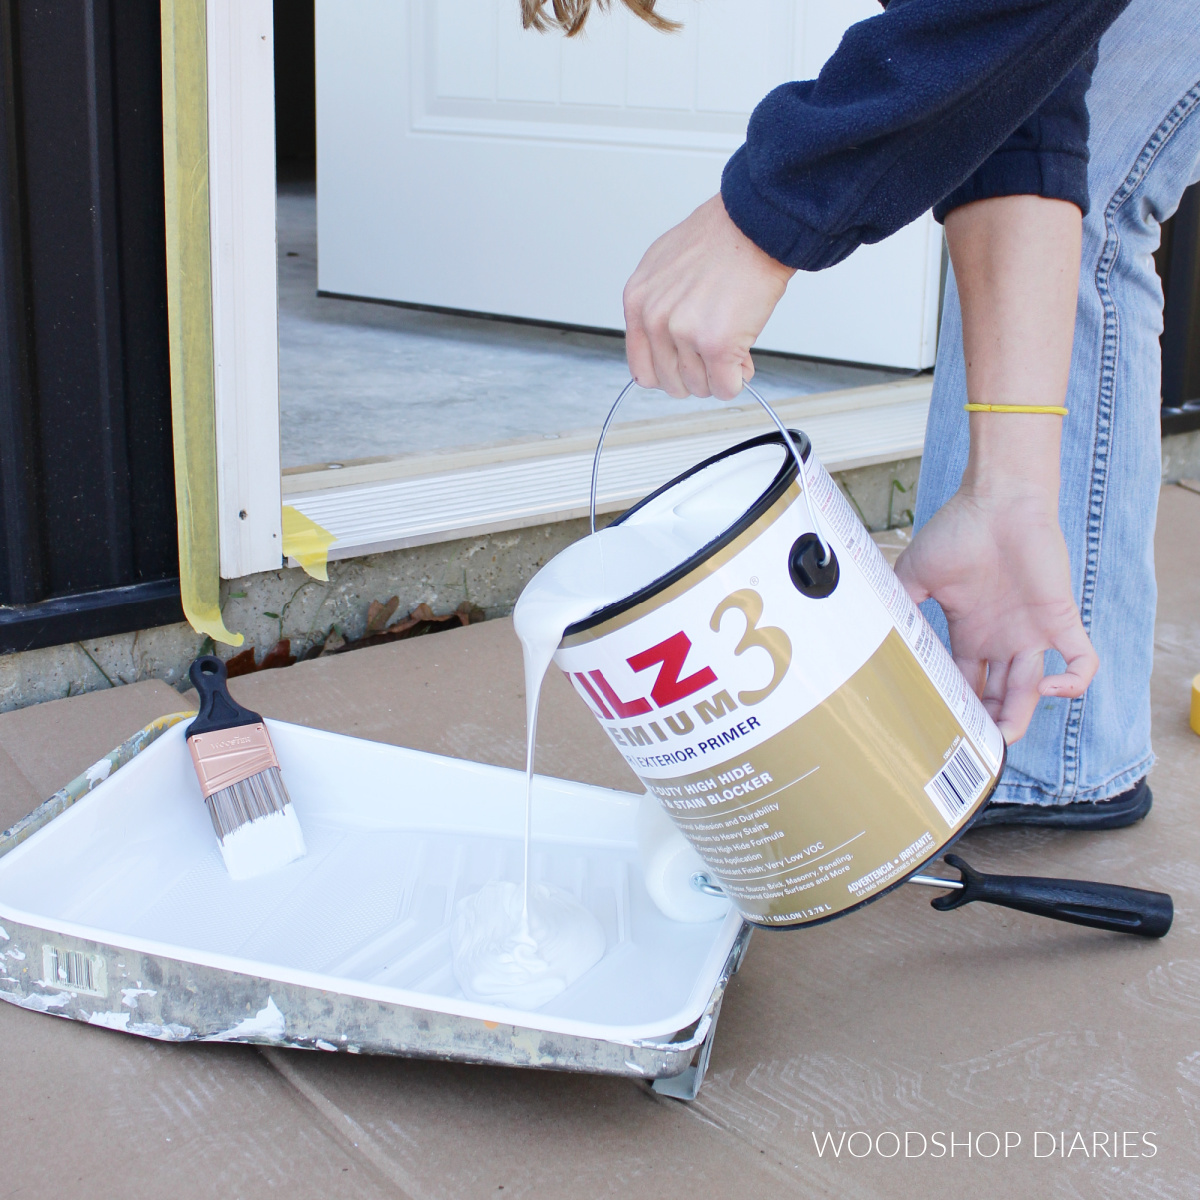 Shara Woodshop Diaries pouring KILZ 3 into paint tray to paint exterior door